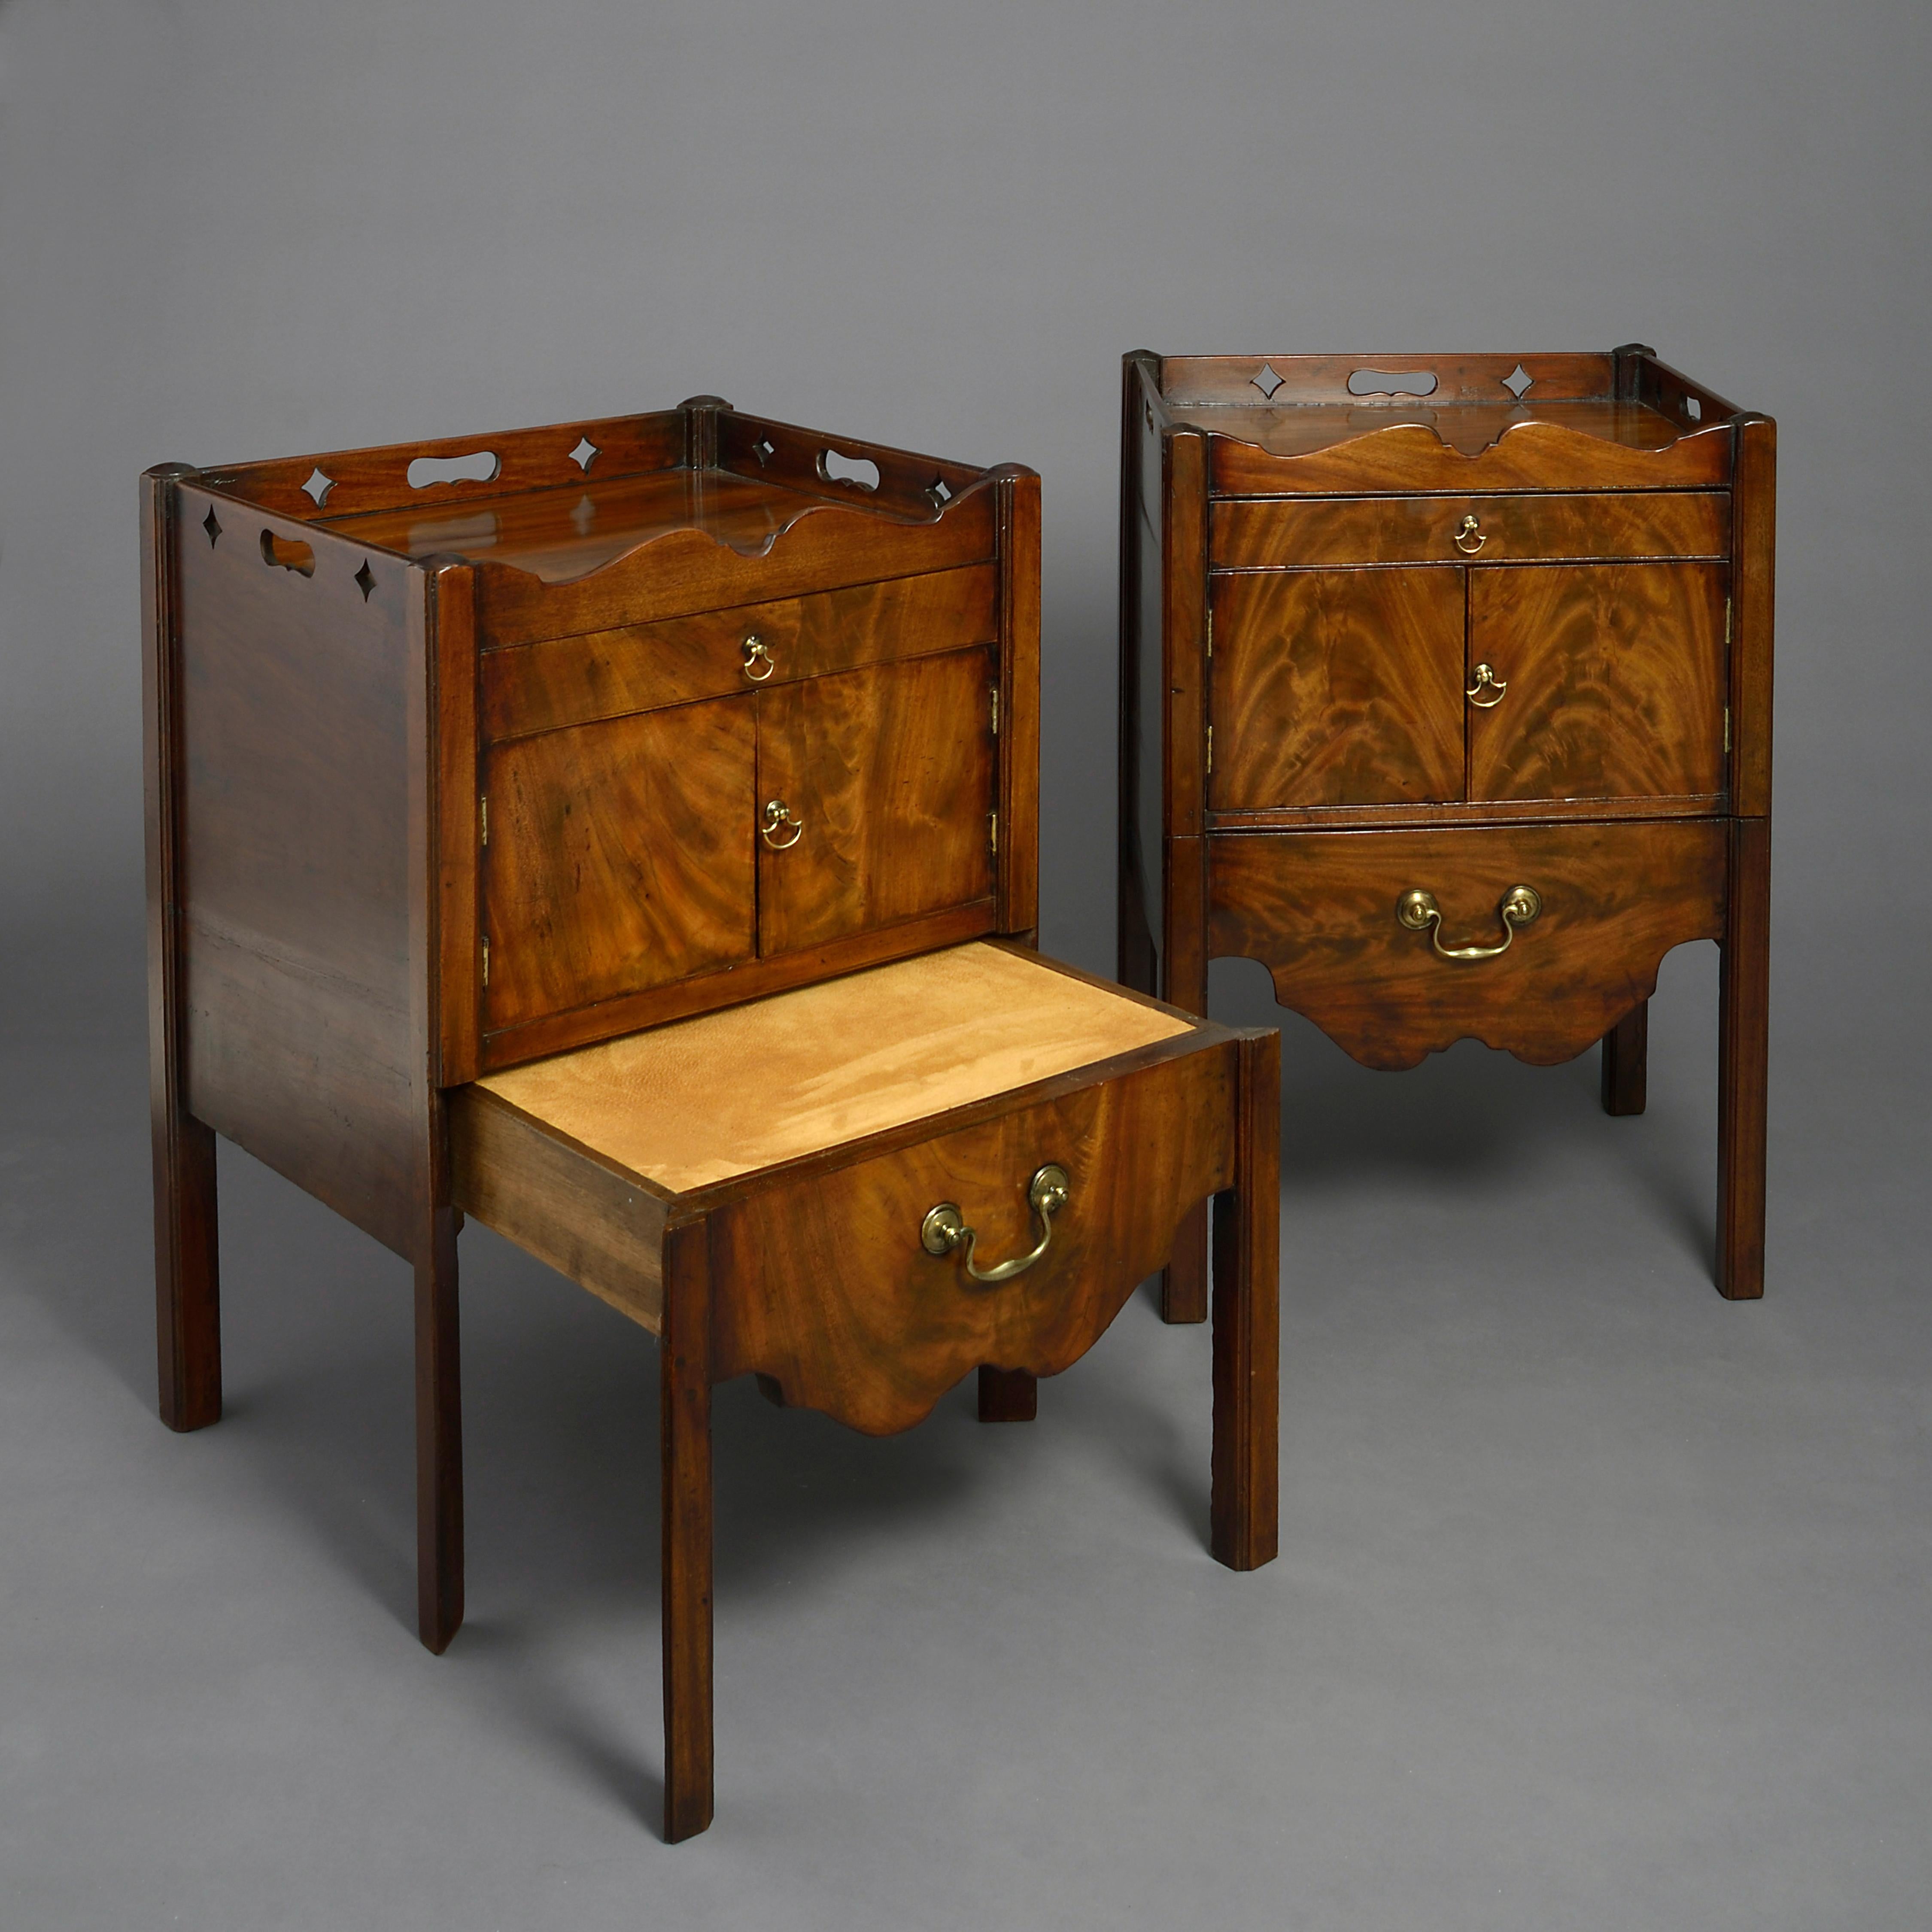 English Pair of 18th Century George III Period Mahogany Bedside Cabinets